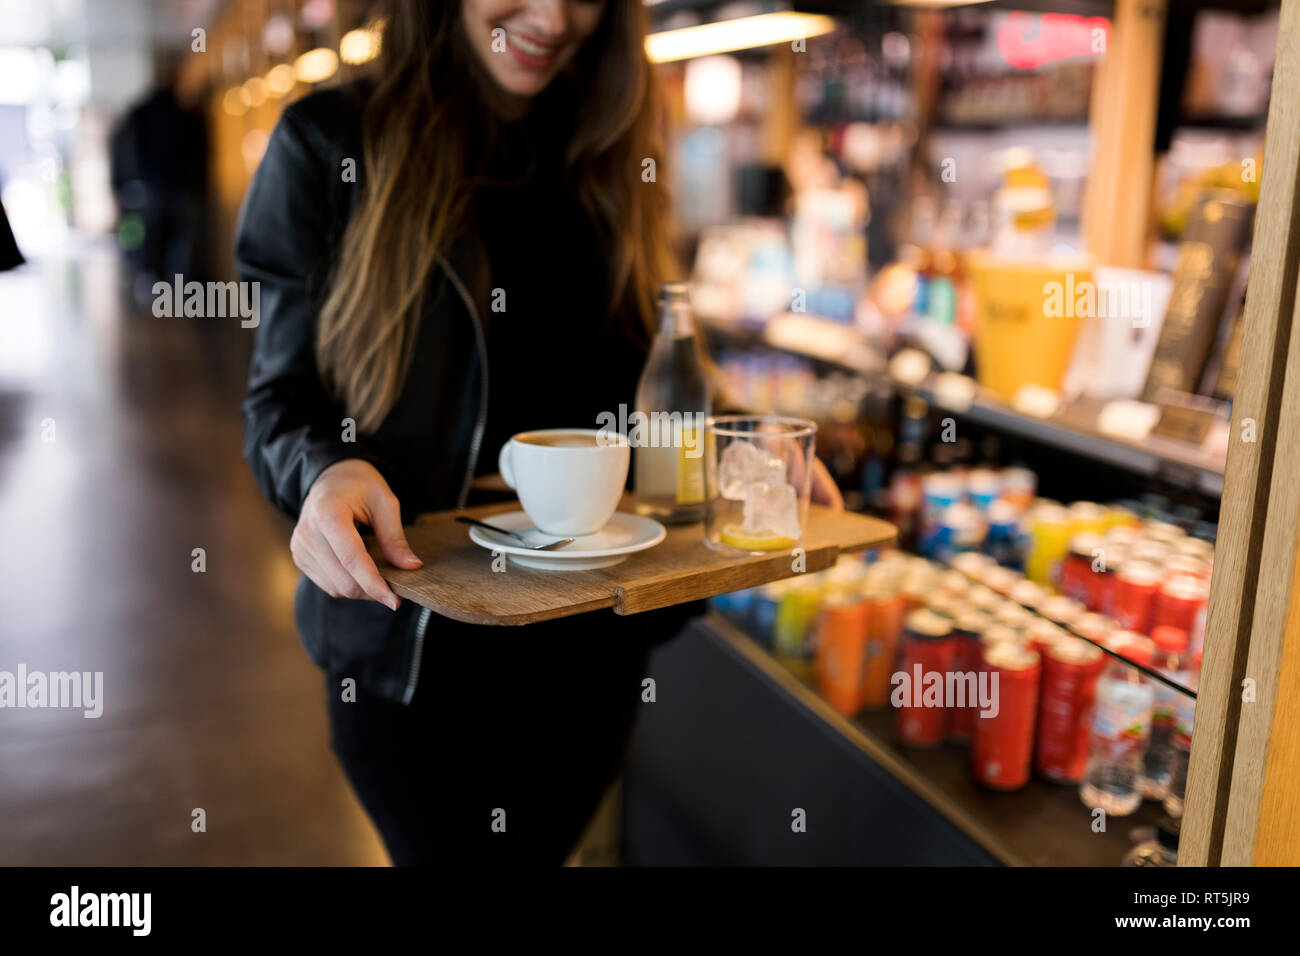 Close-up of woman carrying tray with coffee and soft drink in a self service cafe Stock Photo